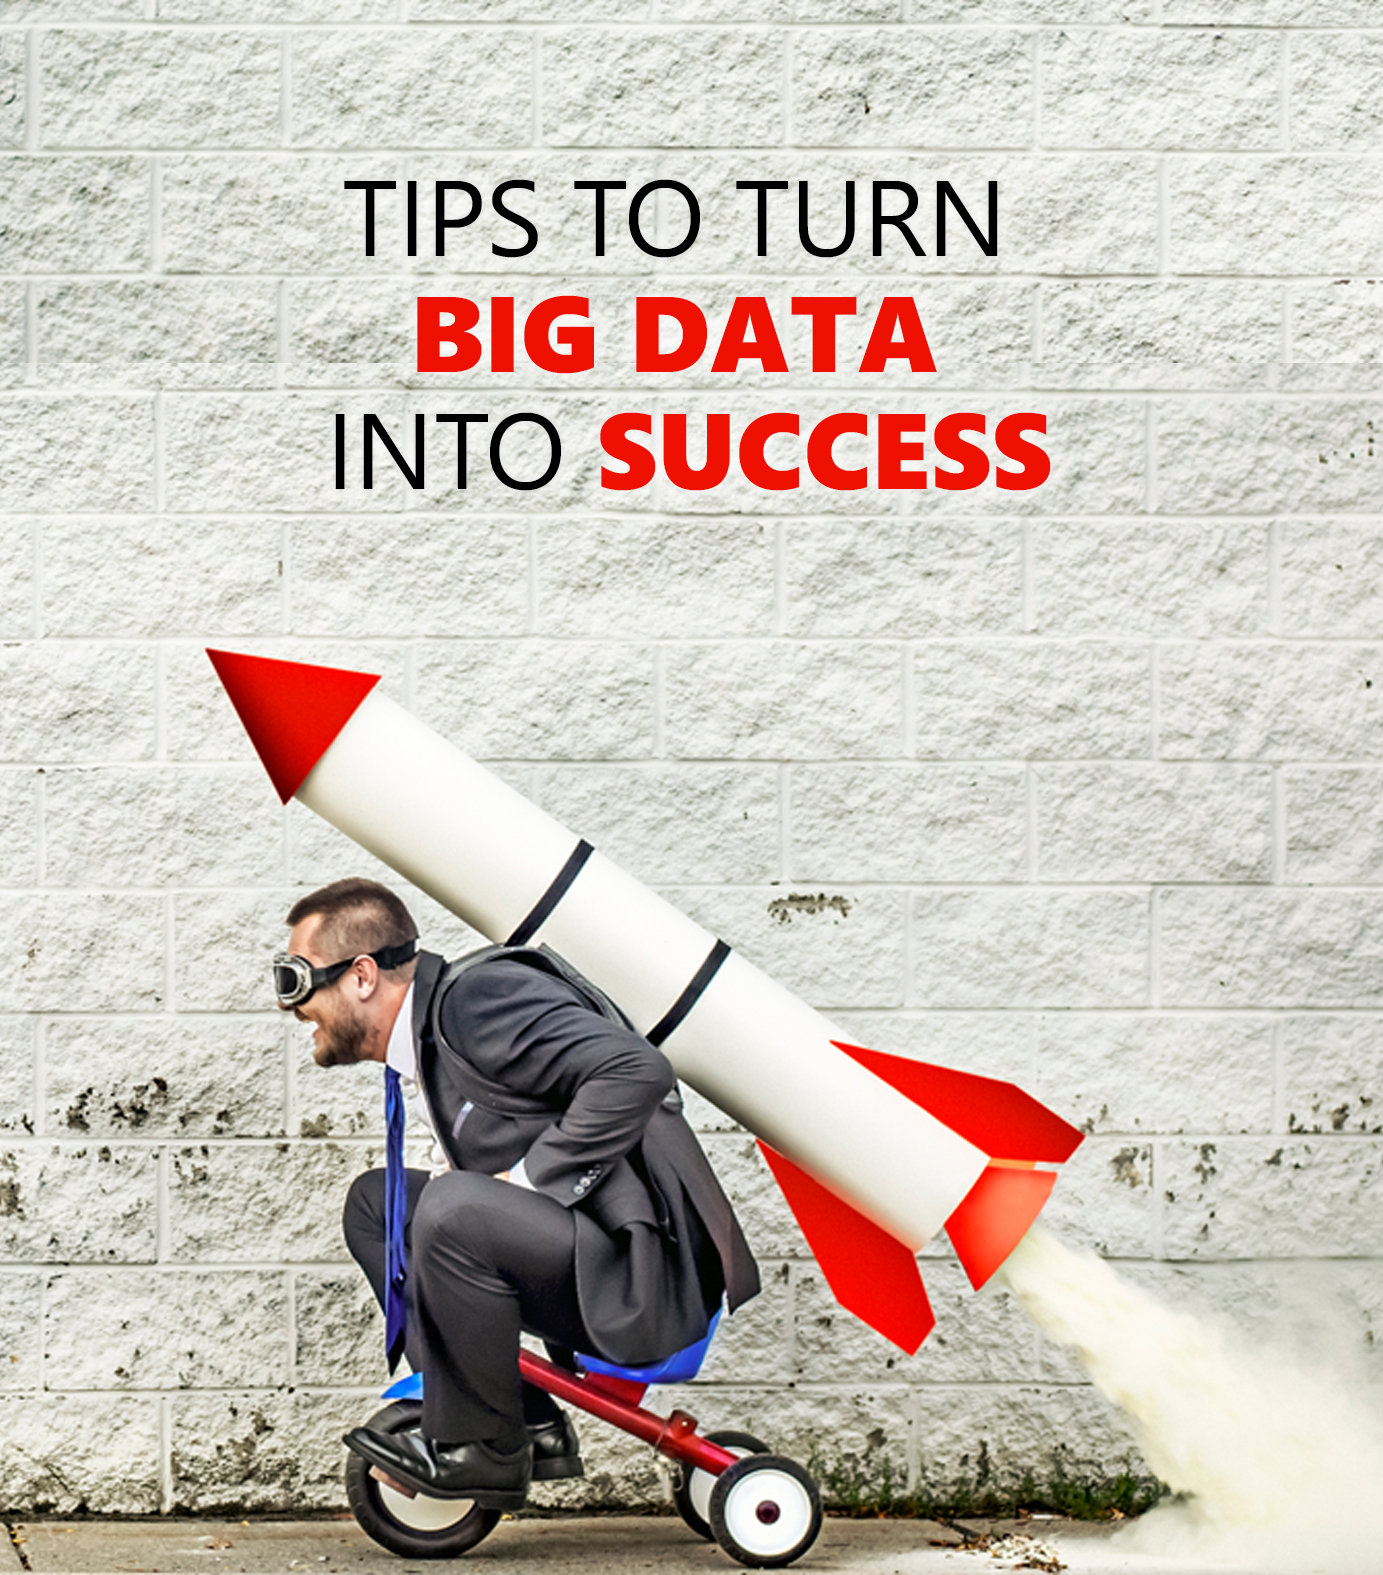 Tips to turn big data into success